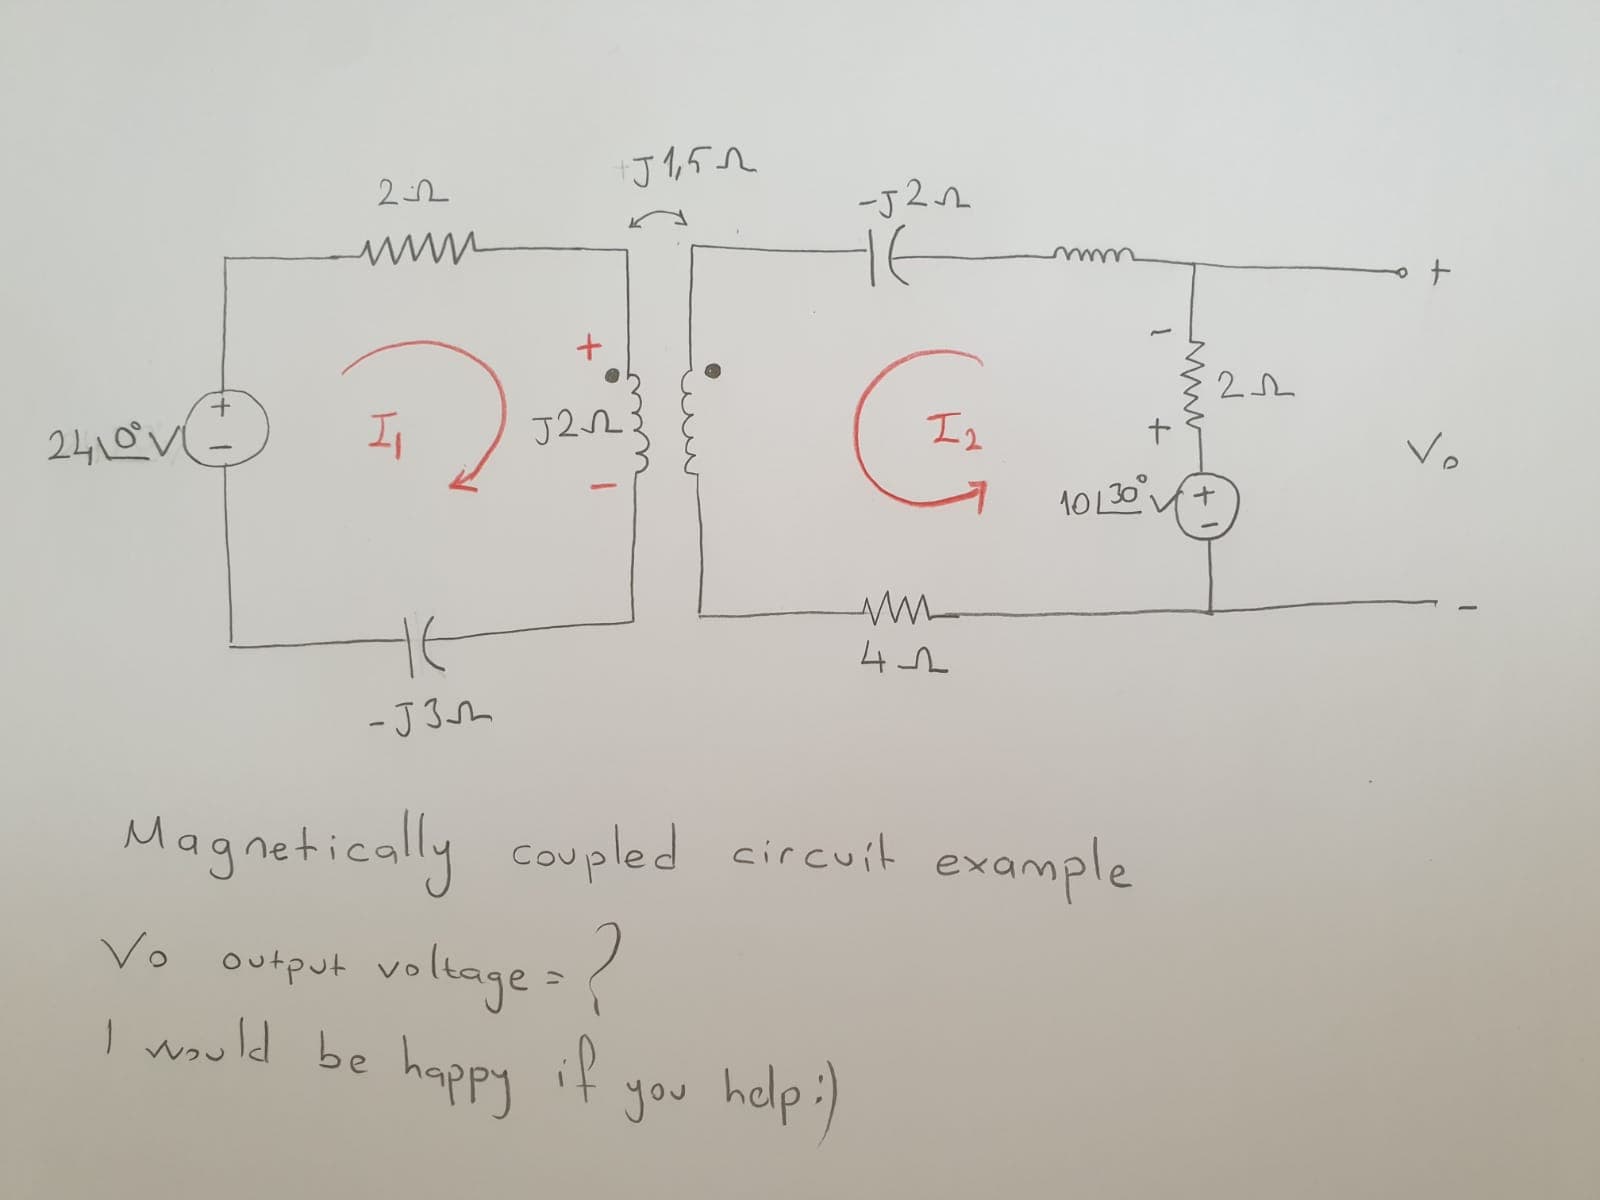 Magnetically coupled circuit evample
Vo
voltage = (
output
